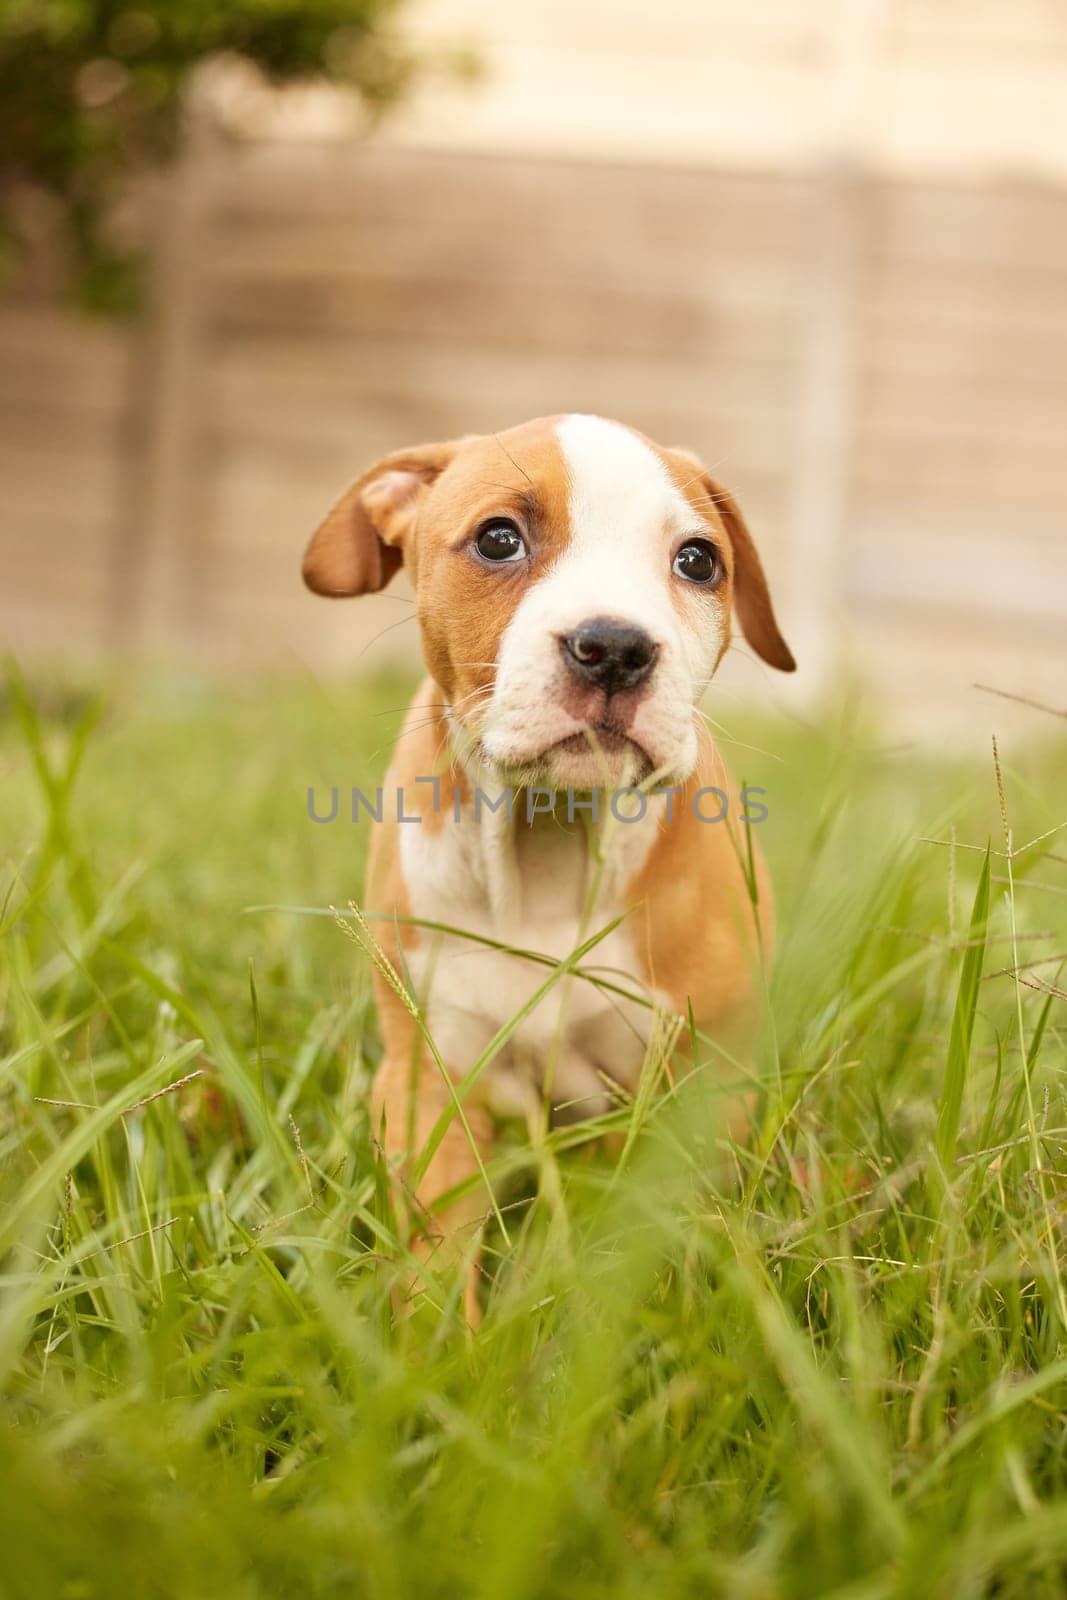 Grass, dog and puppy in backyard or lawn for adoption, rescue shelter and animal care. Cute, pets and adorable innocent pitbull outdoors for playing, rest and relax in environment, field and nature.